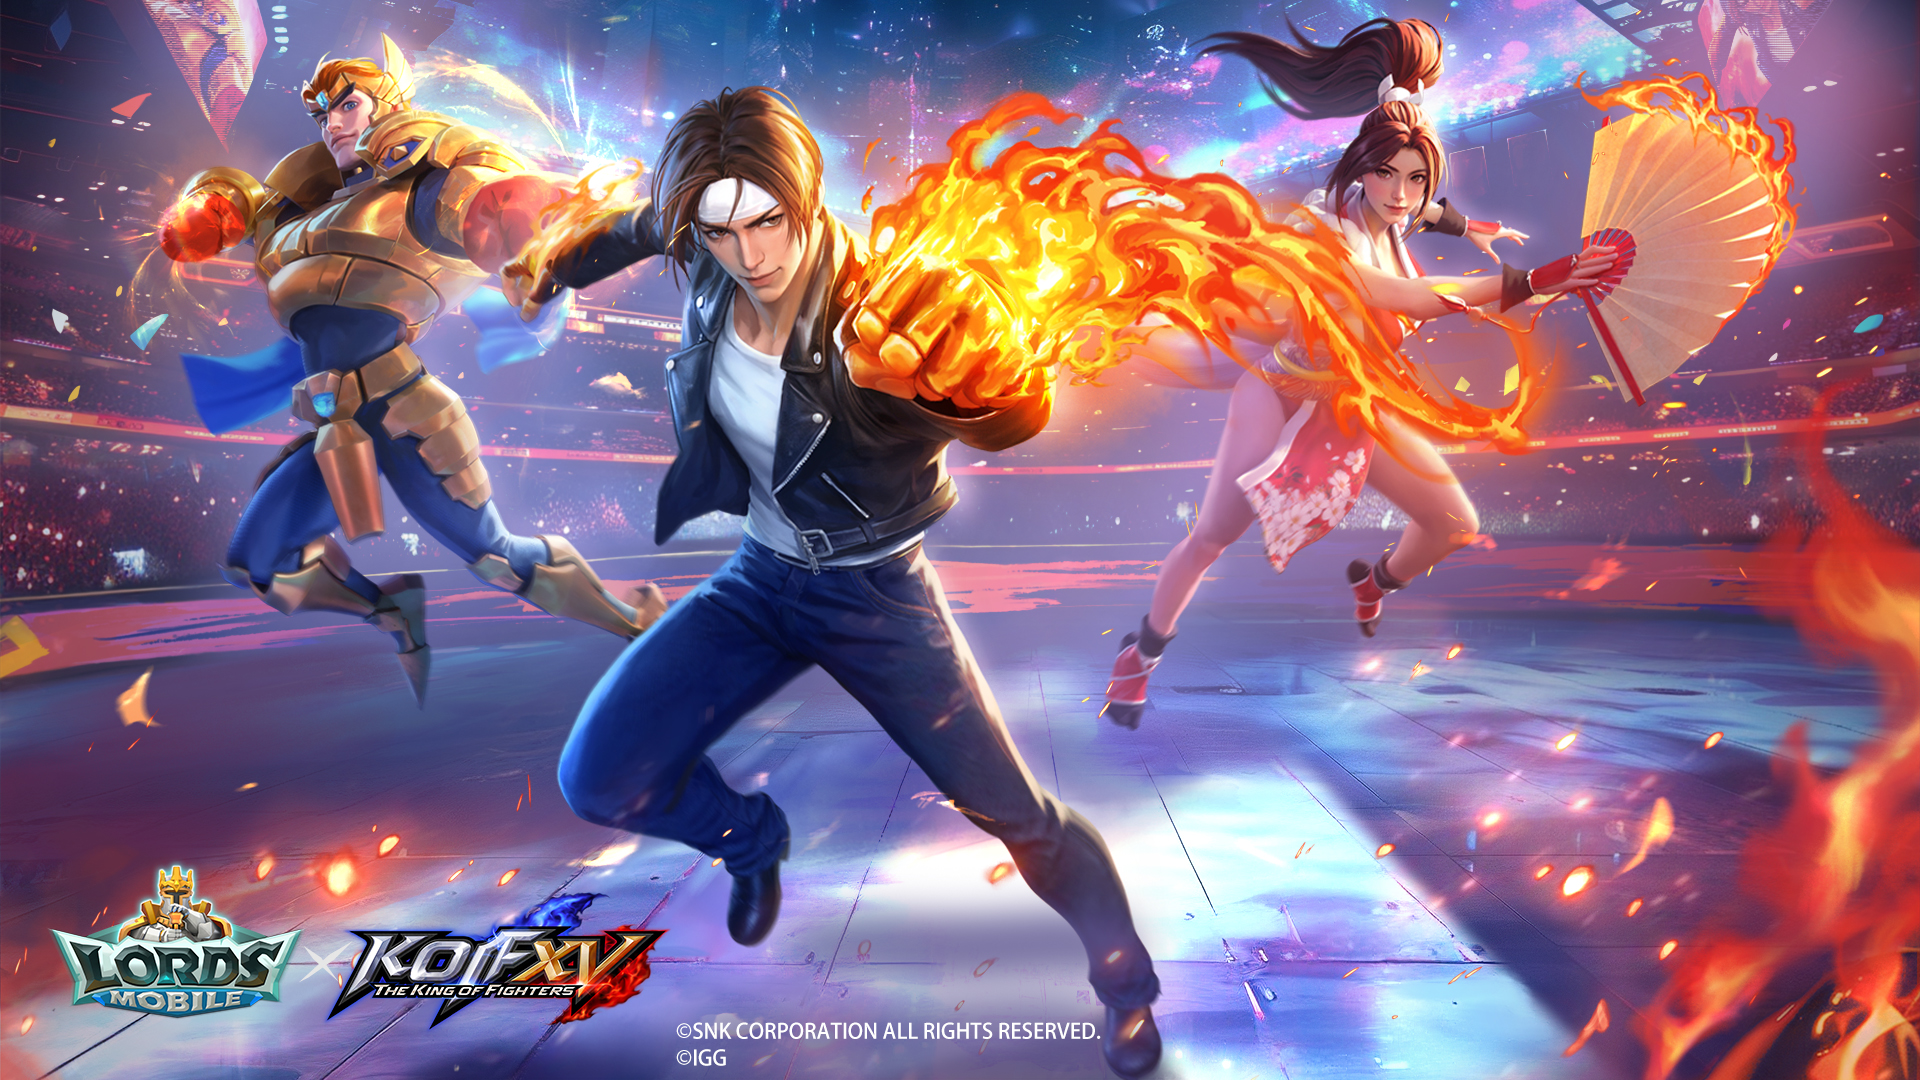 Lords Mobile x THE KING OF FIGHTERS XV crossover event.